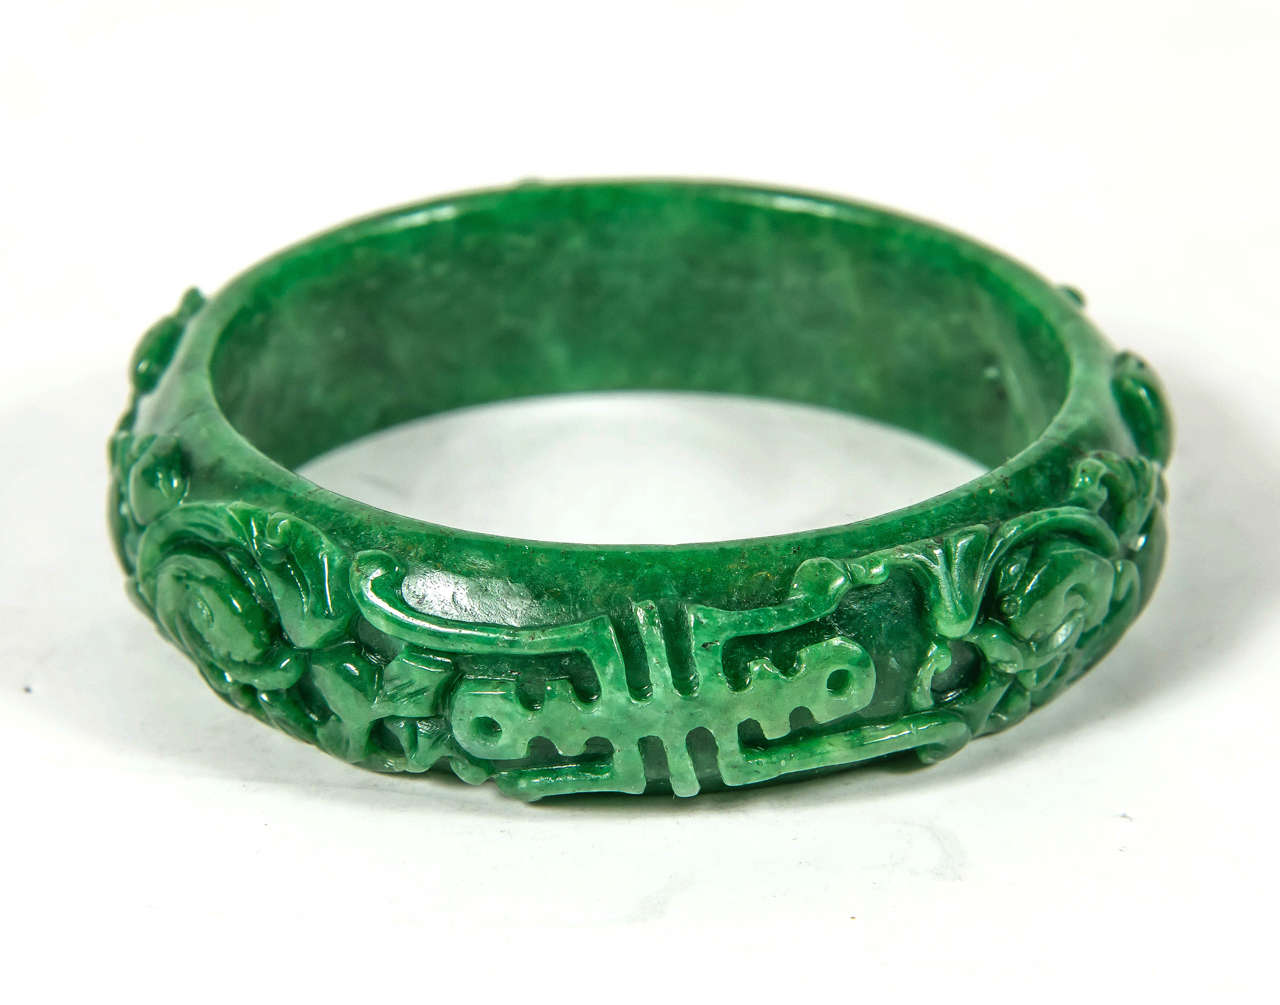 This hand carved Chinese Stone  bracelet feature a stylized floral and scroll design executed in fine hand carved jade.